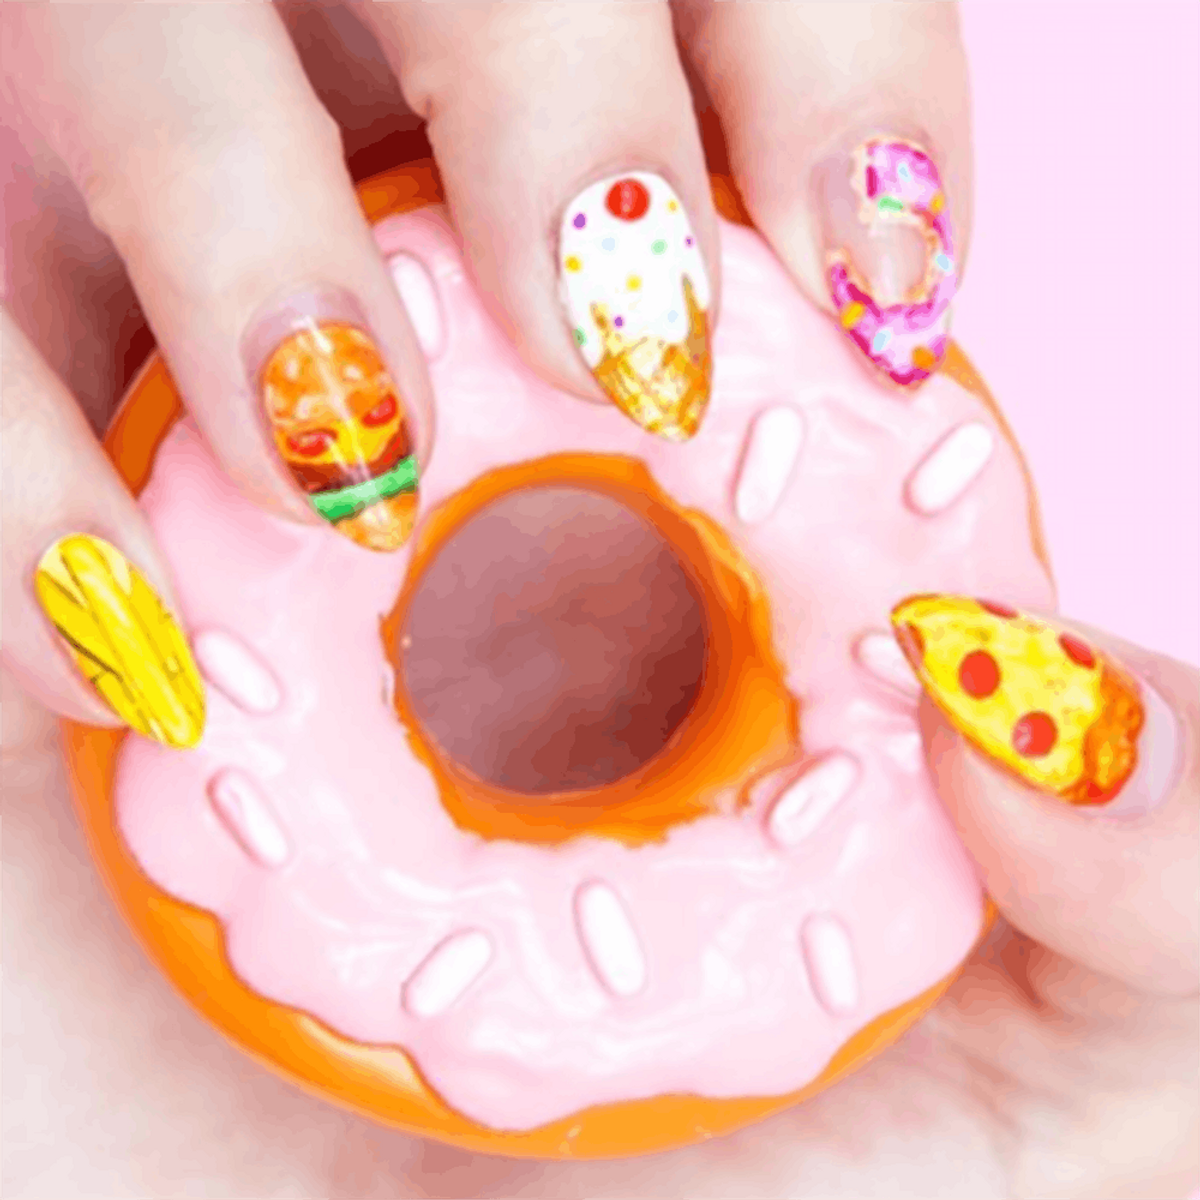 These Foodie Manicures Will Give You the Munchies